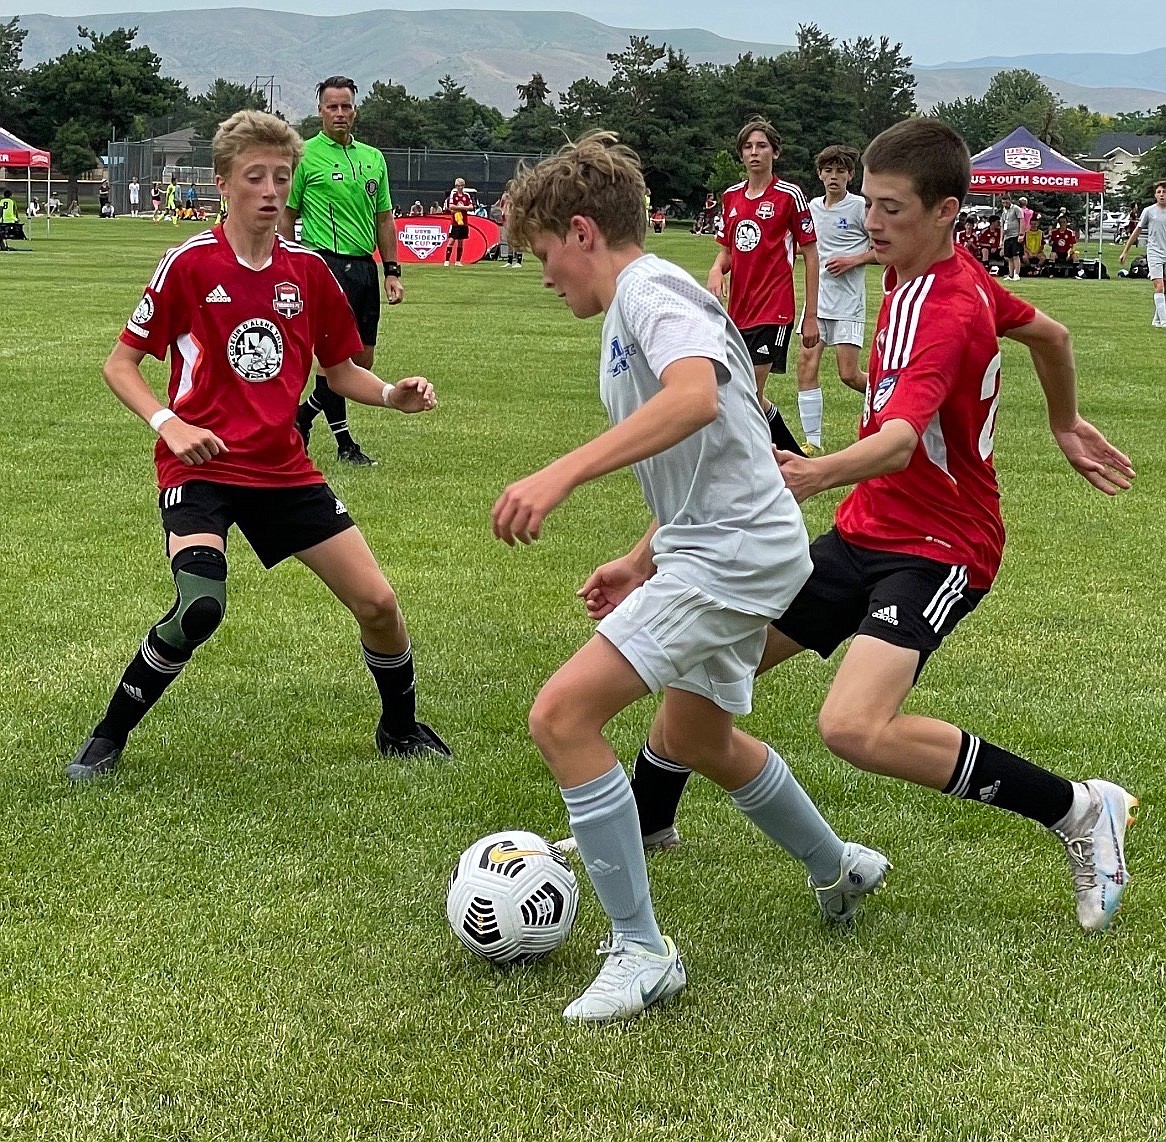 US YOUTH SOCCER FAR WEST PRESIDENTS CUP Timbers, Thorns teams all fall